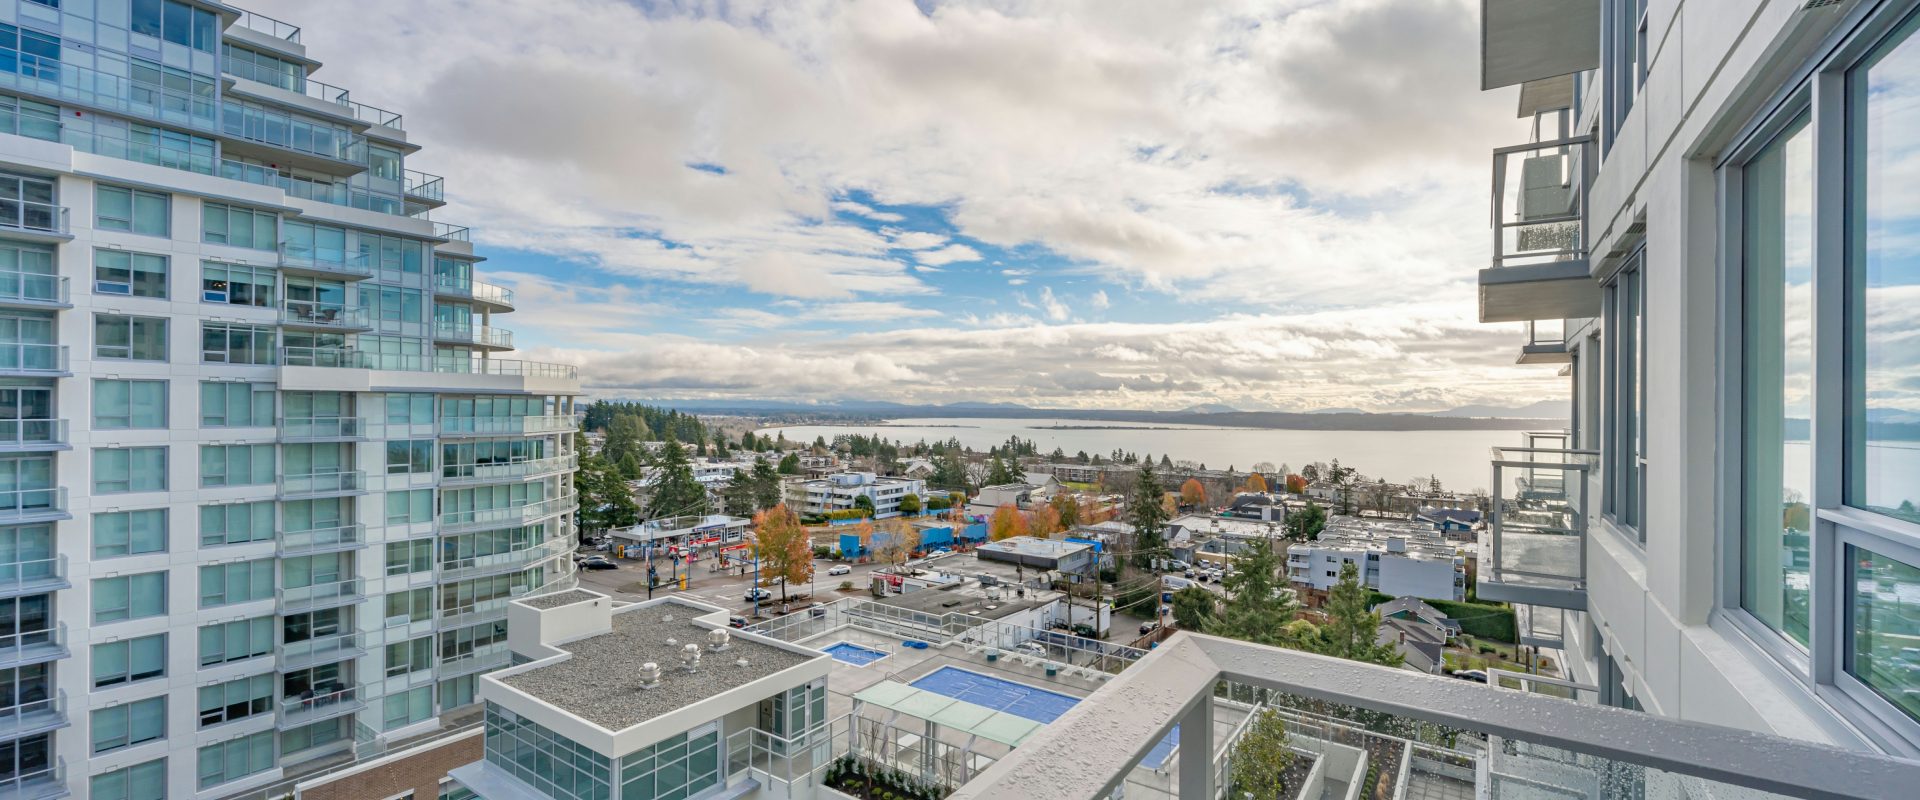 Brand New 2br 2ba Condo in White Rock with Wonderful Views of the Sea!